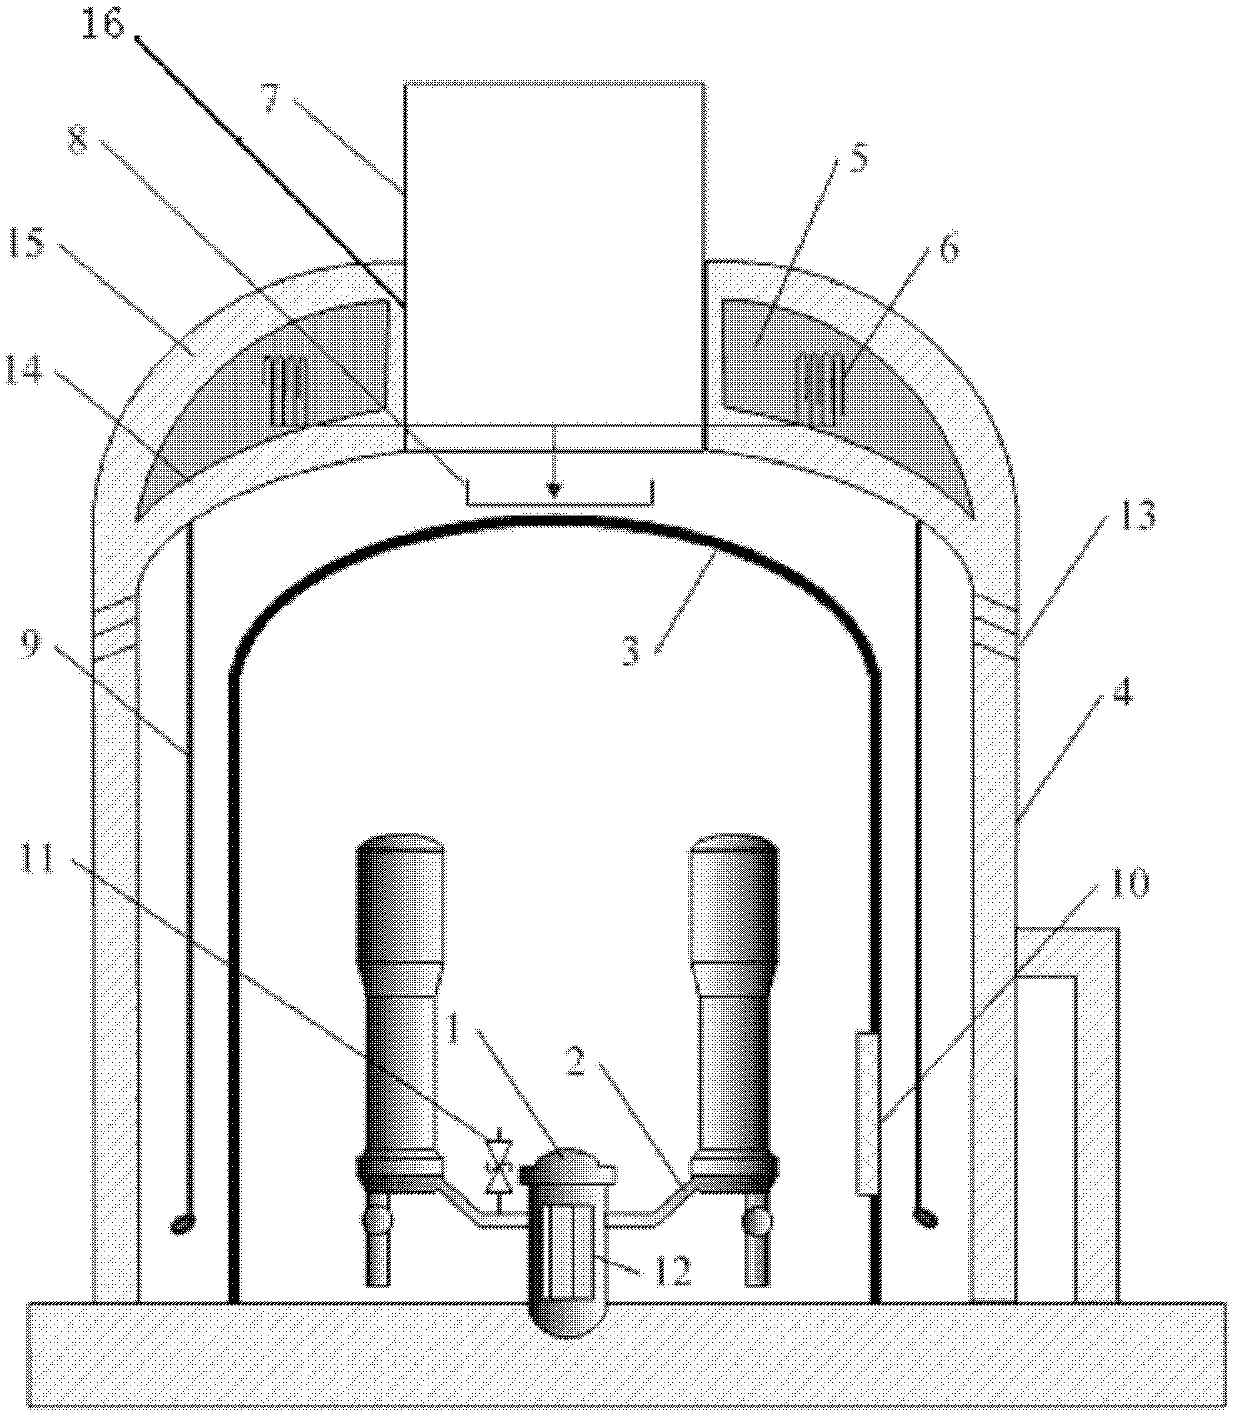 Complete passive cooling system for post-accident reactor cores of large PWR (pressurized water reactor) nuclear power plants